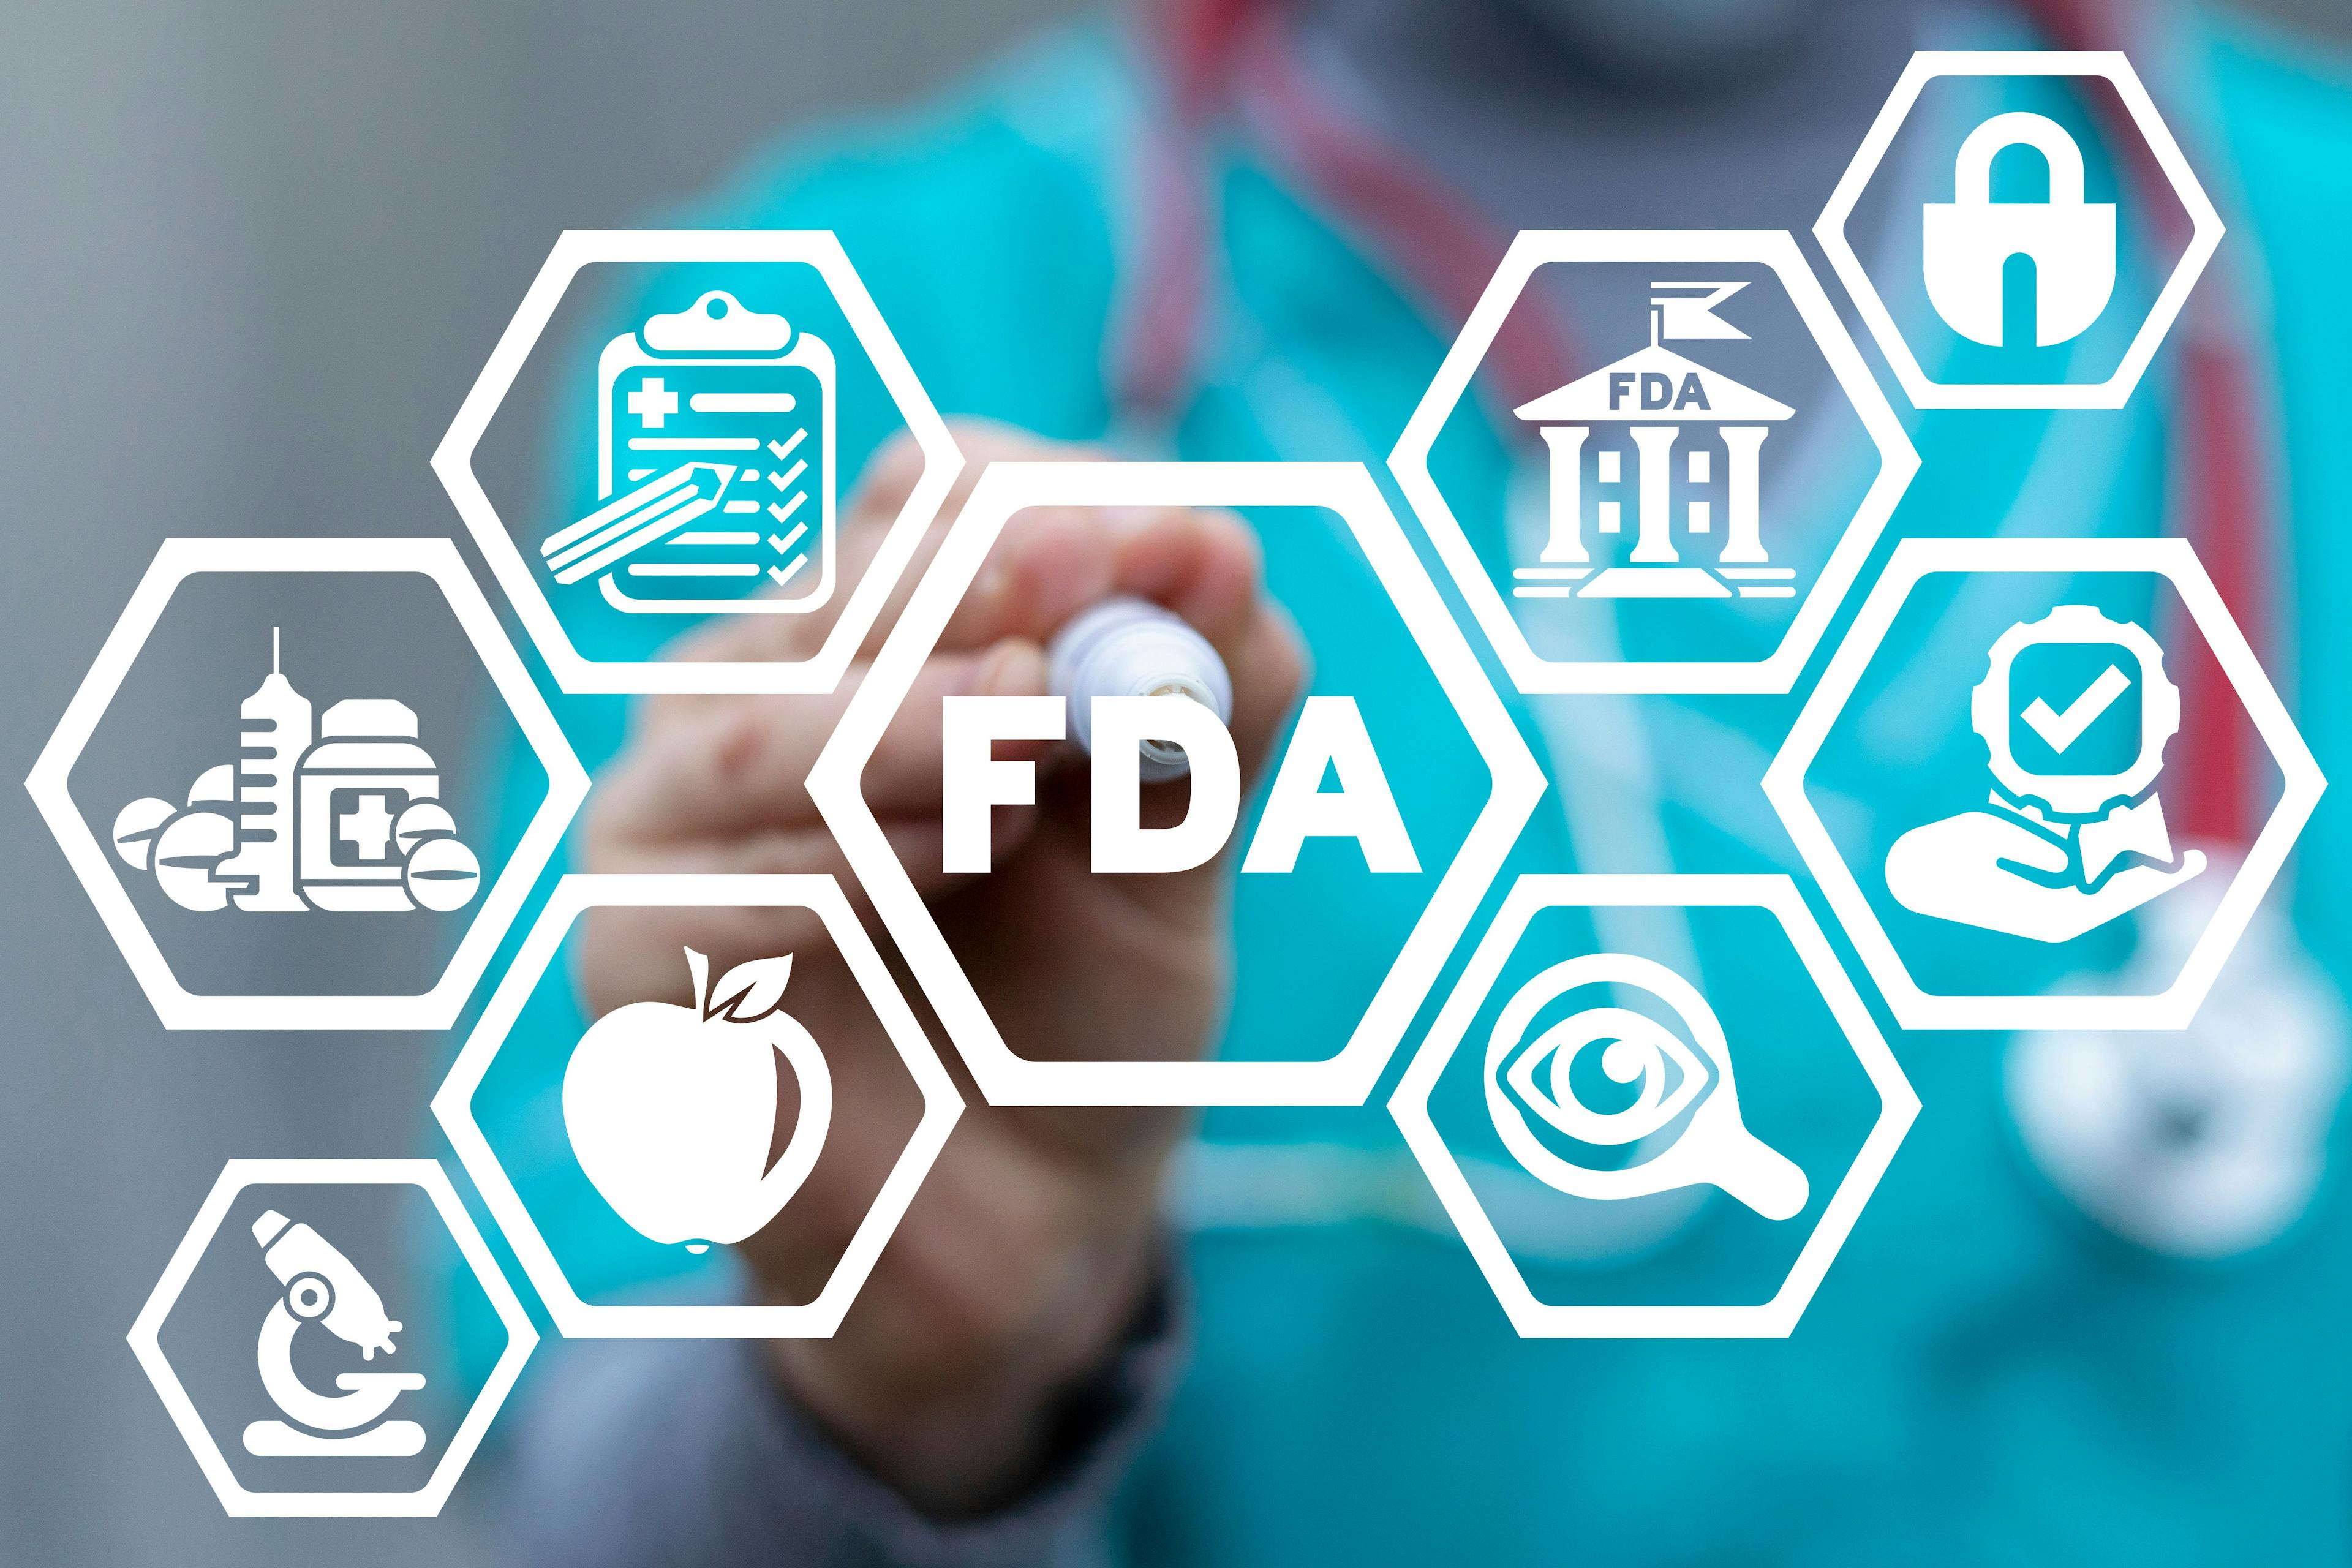 Concept of FDA Food and Drug Administration